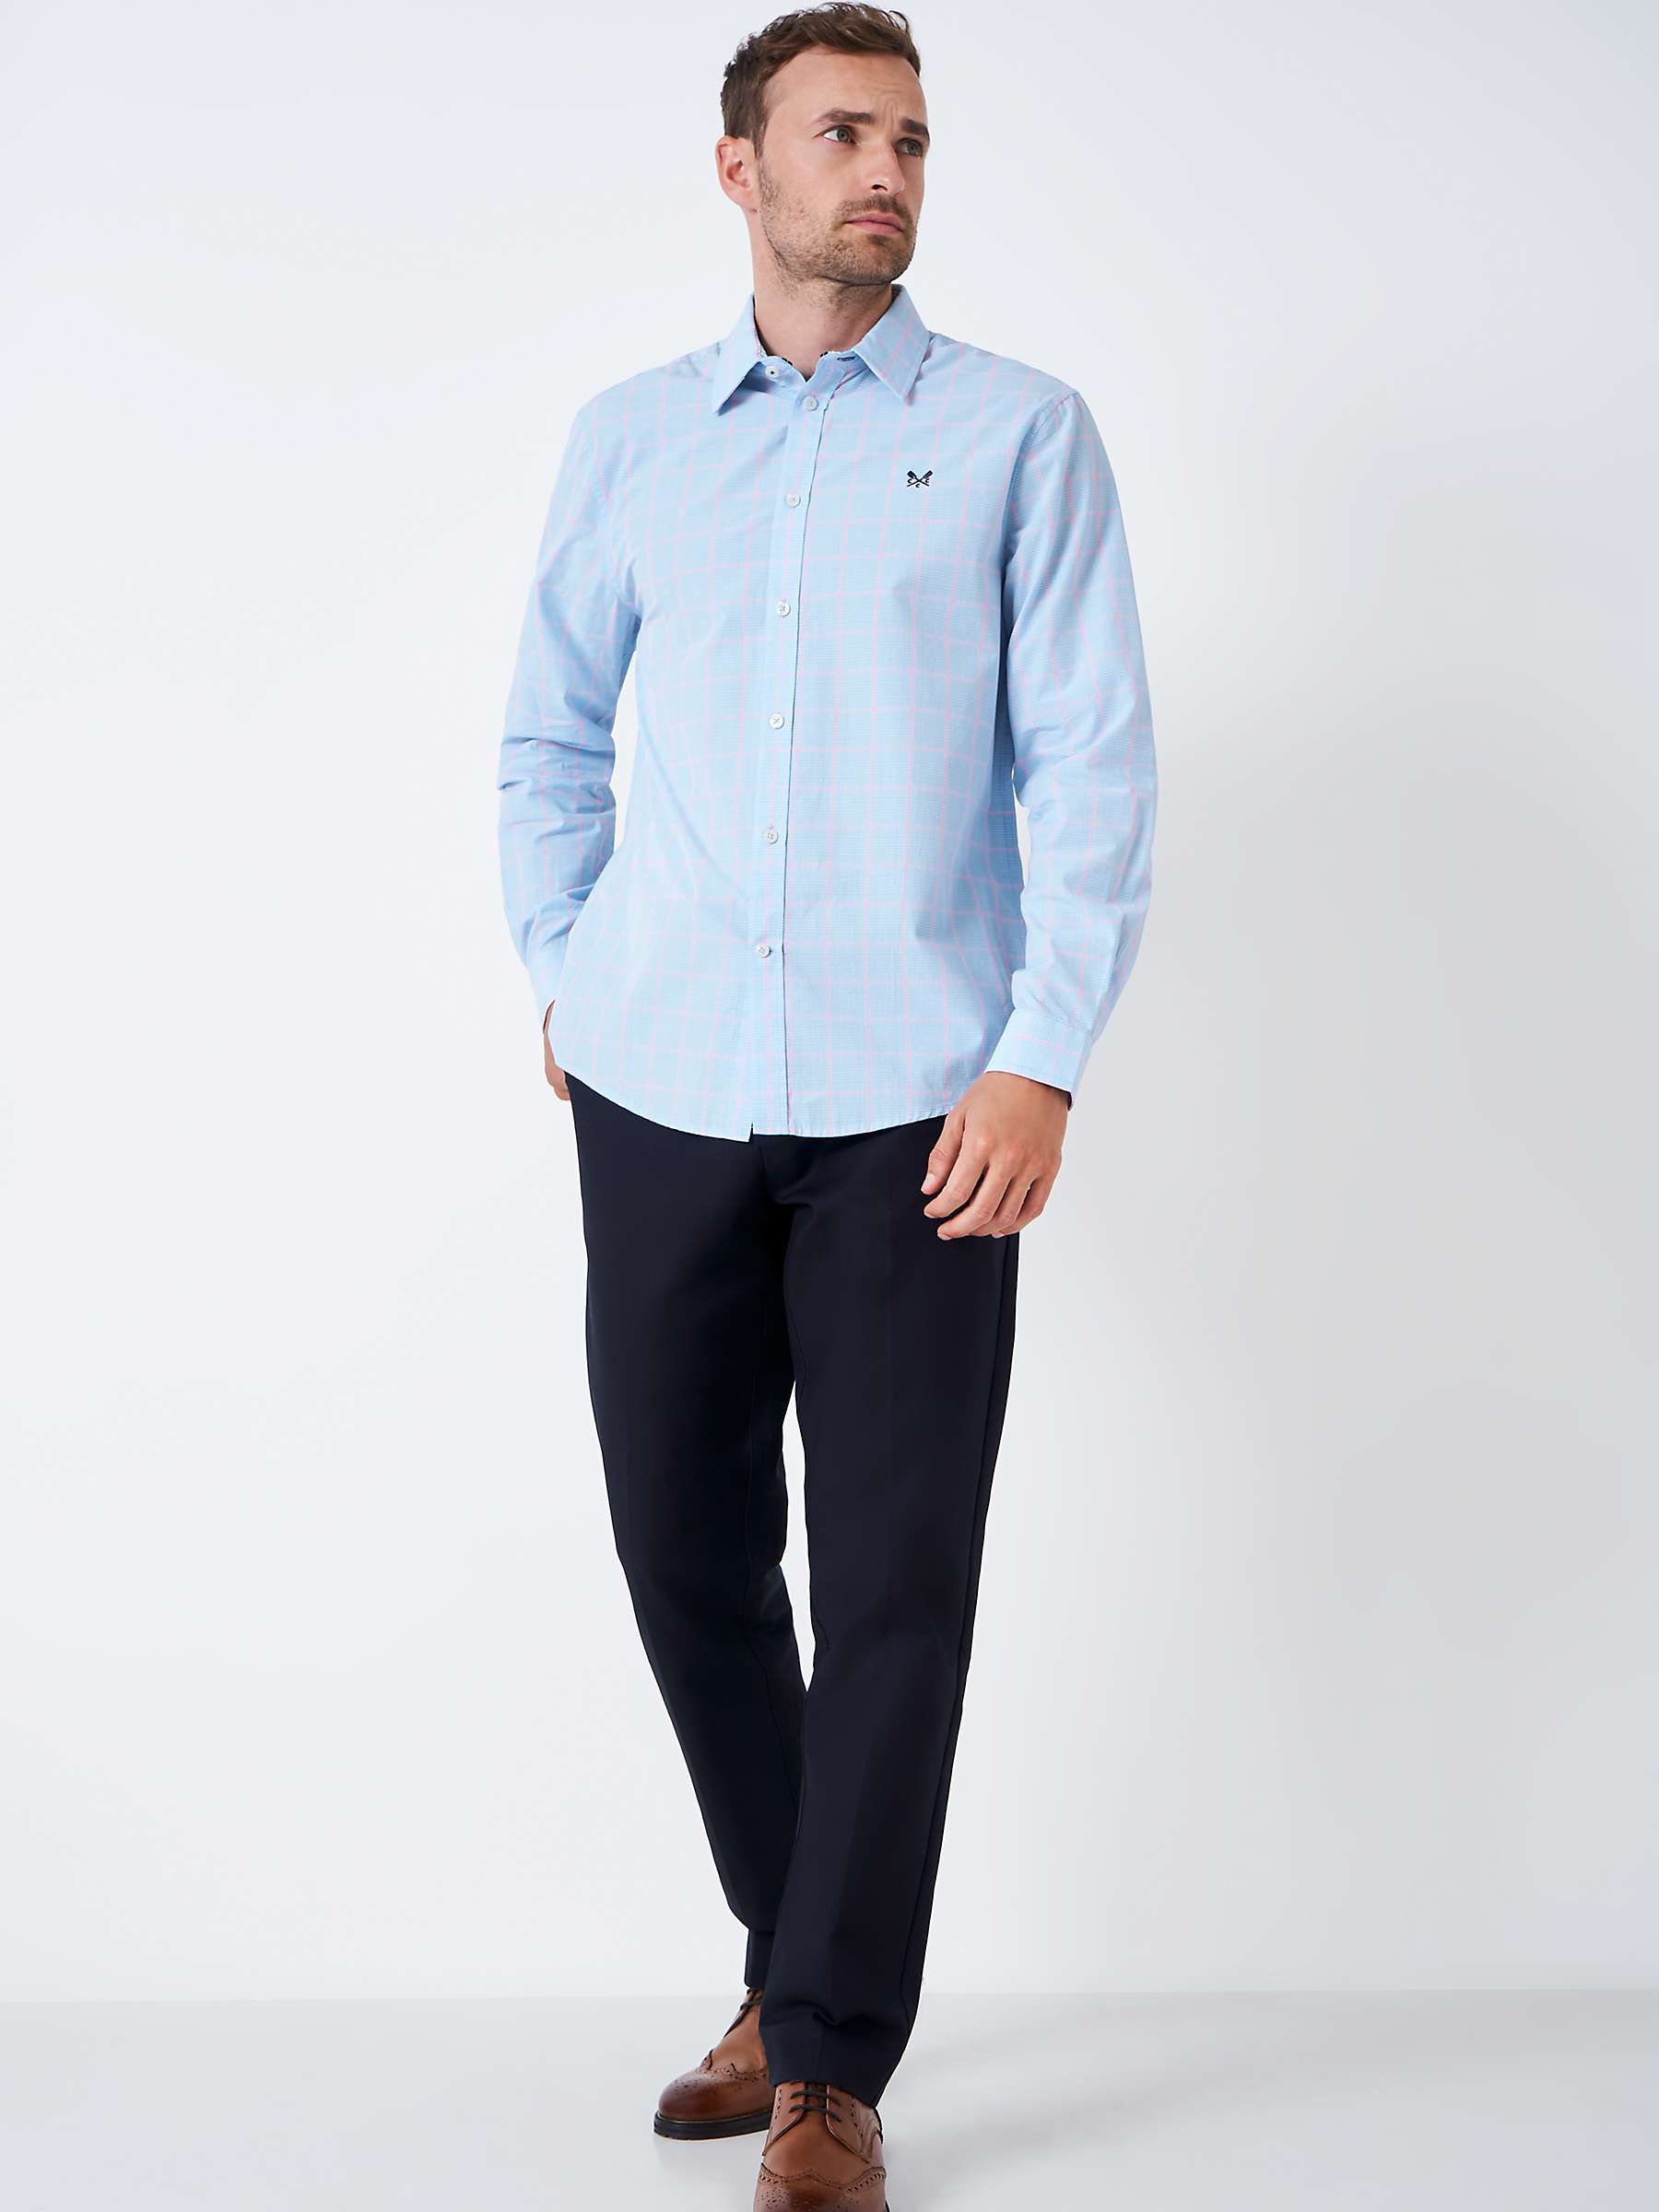 Buy Crew Clothing Poplin Prince Of wales Check Shirt, Light Blue Online at johnlewis.com